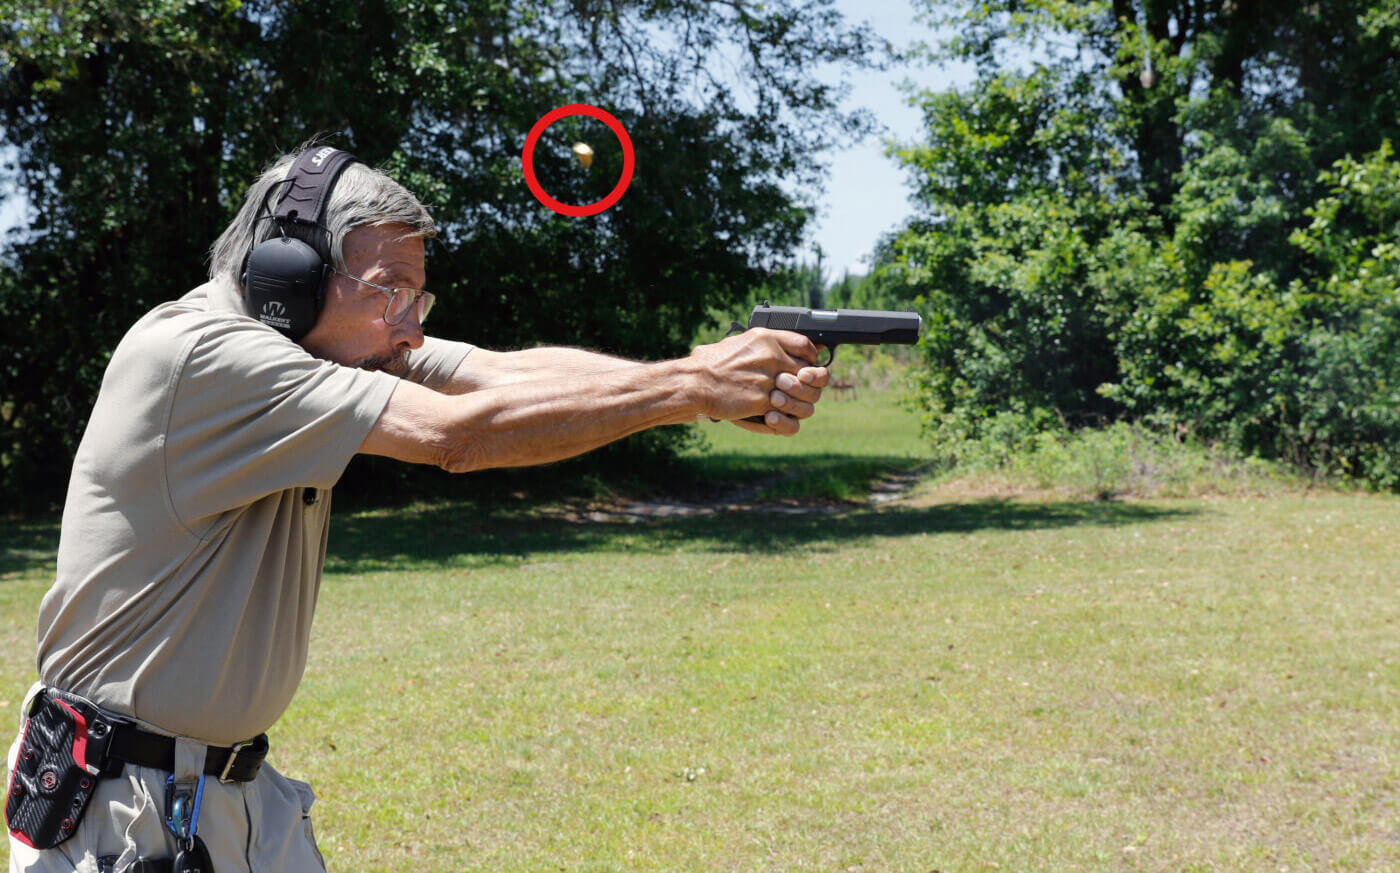 Shooting a Springfield Armory 1911 on the range